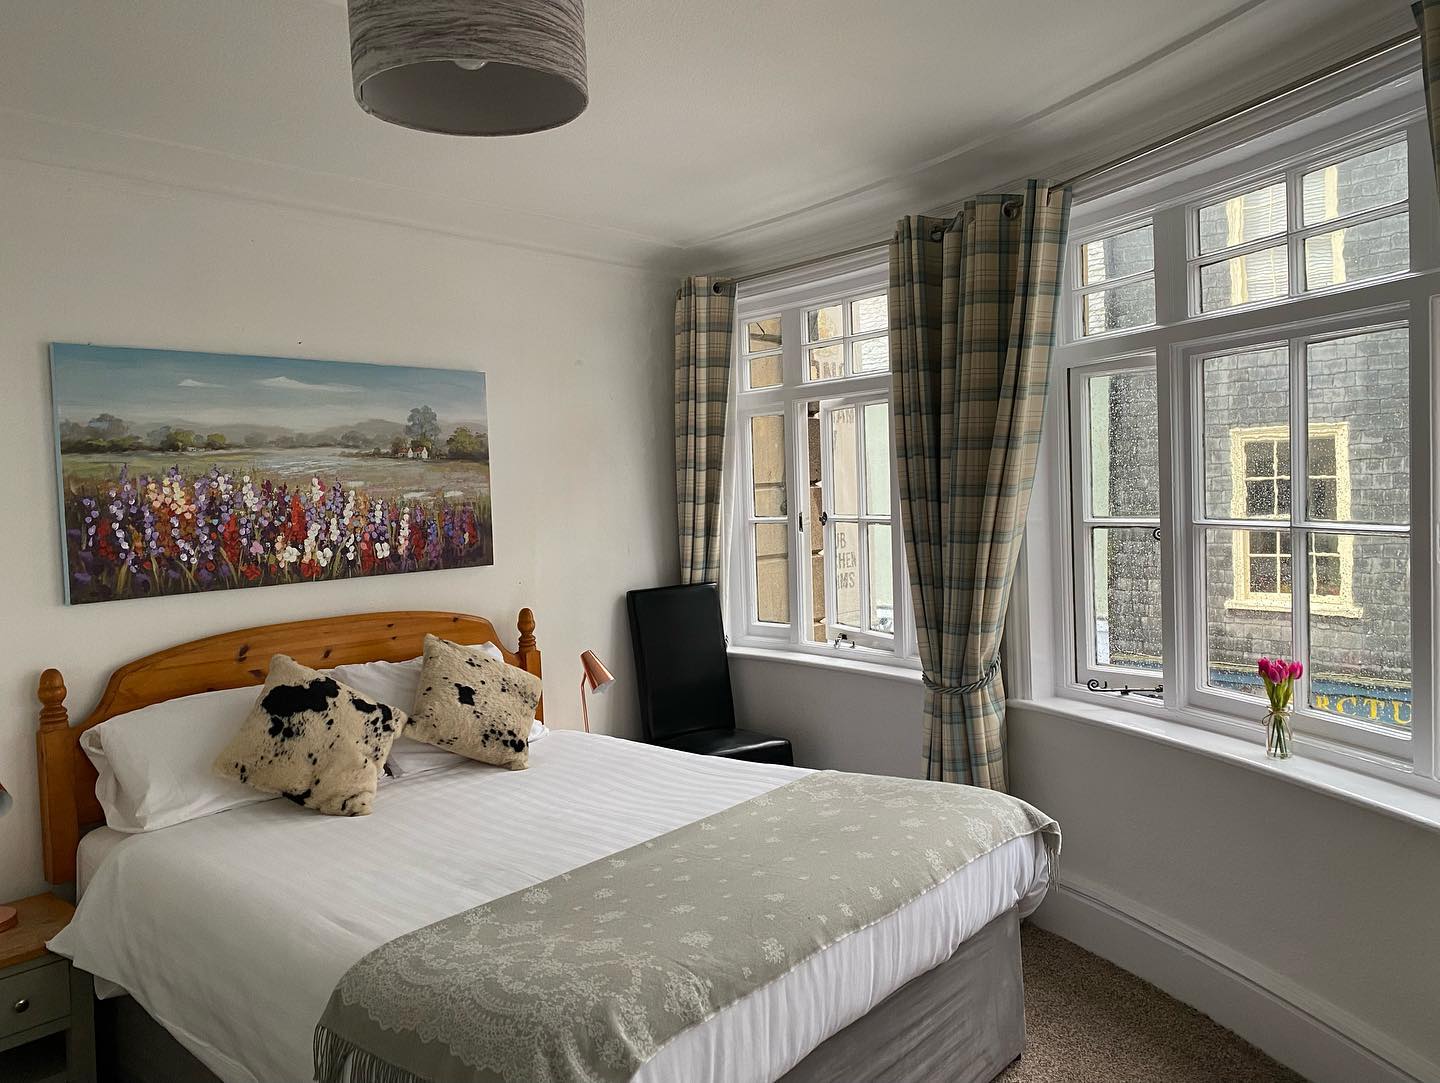 Picture of Room 1, places to stay in Totnes